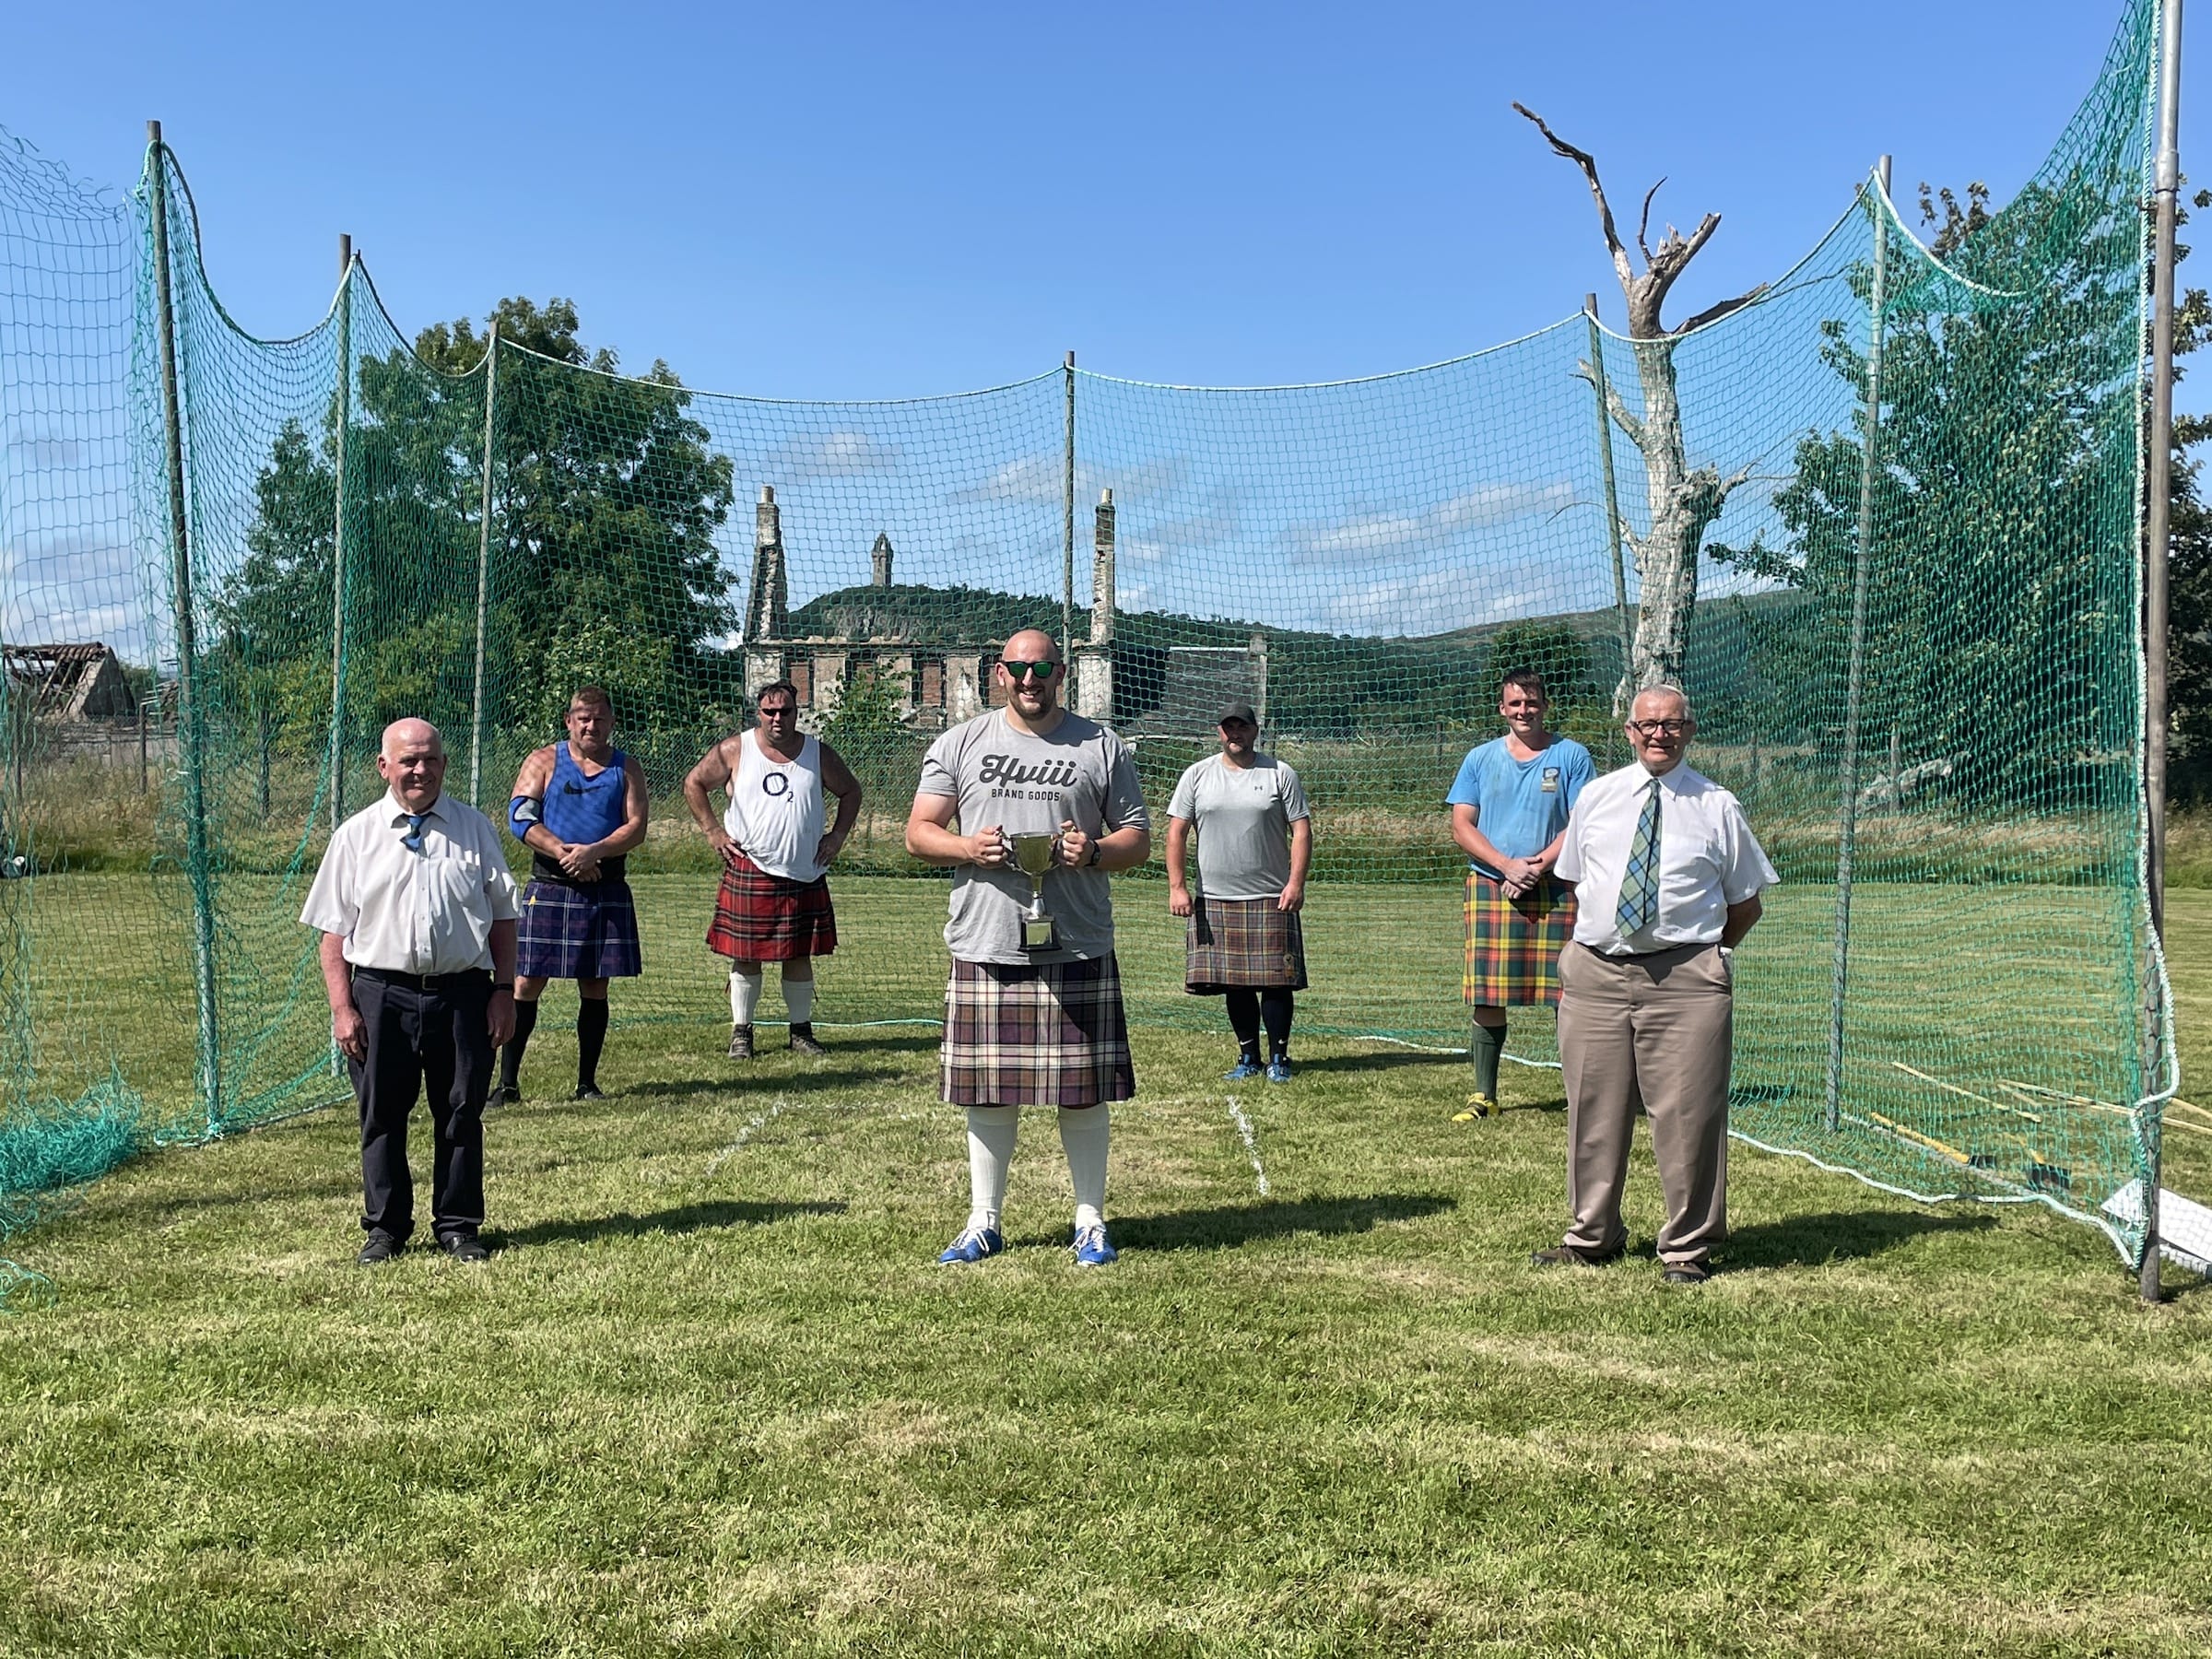 The 2021 Stirling Highland Games Heavyweight Champion Kyle Randalls